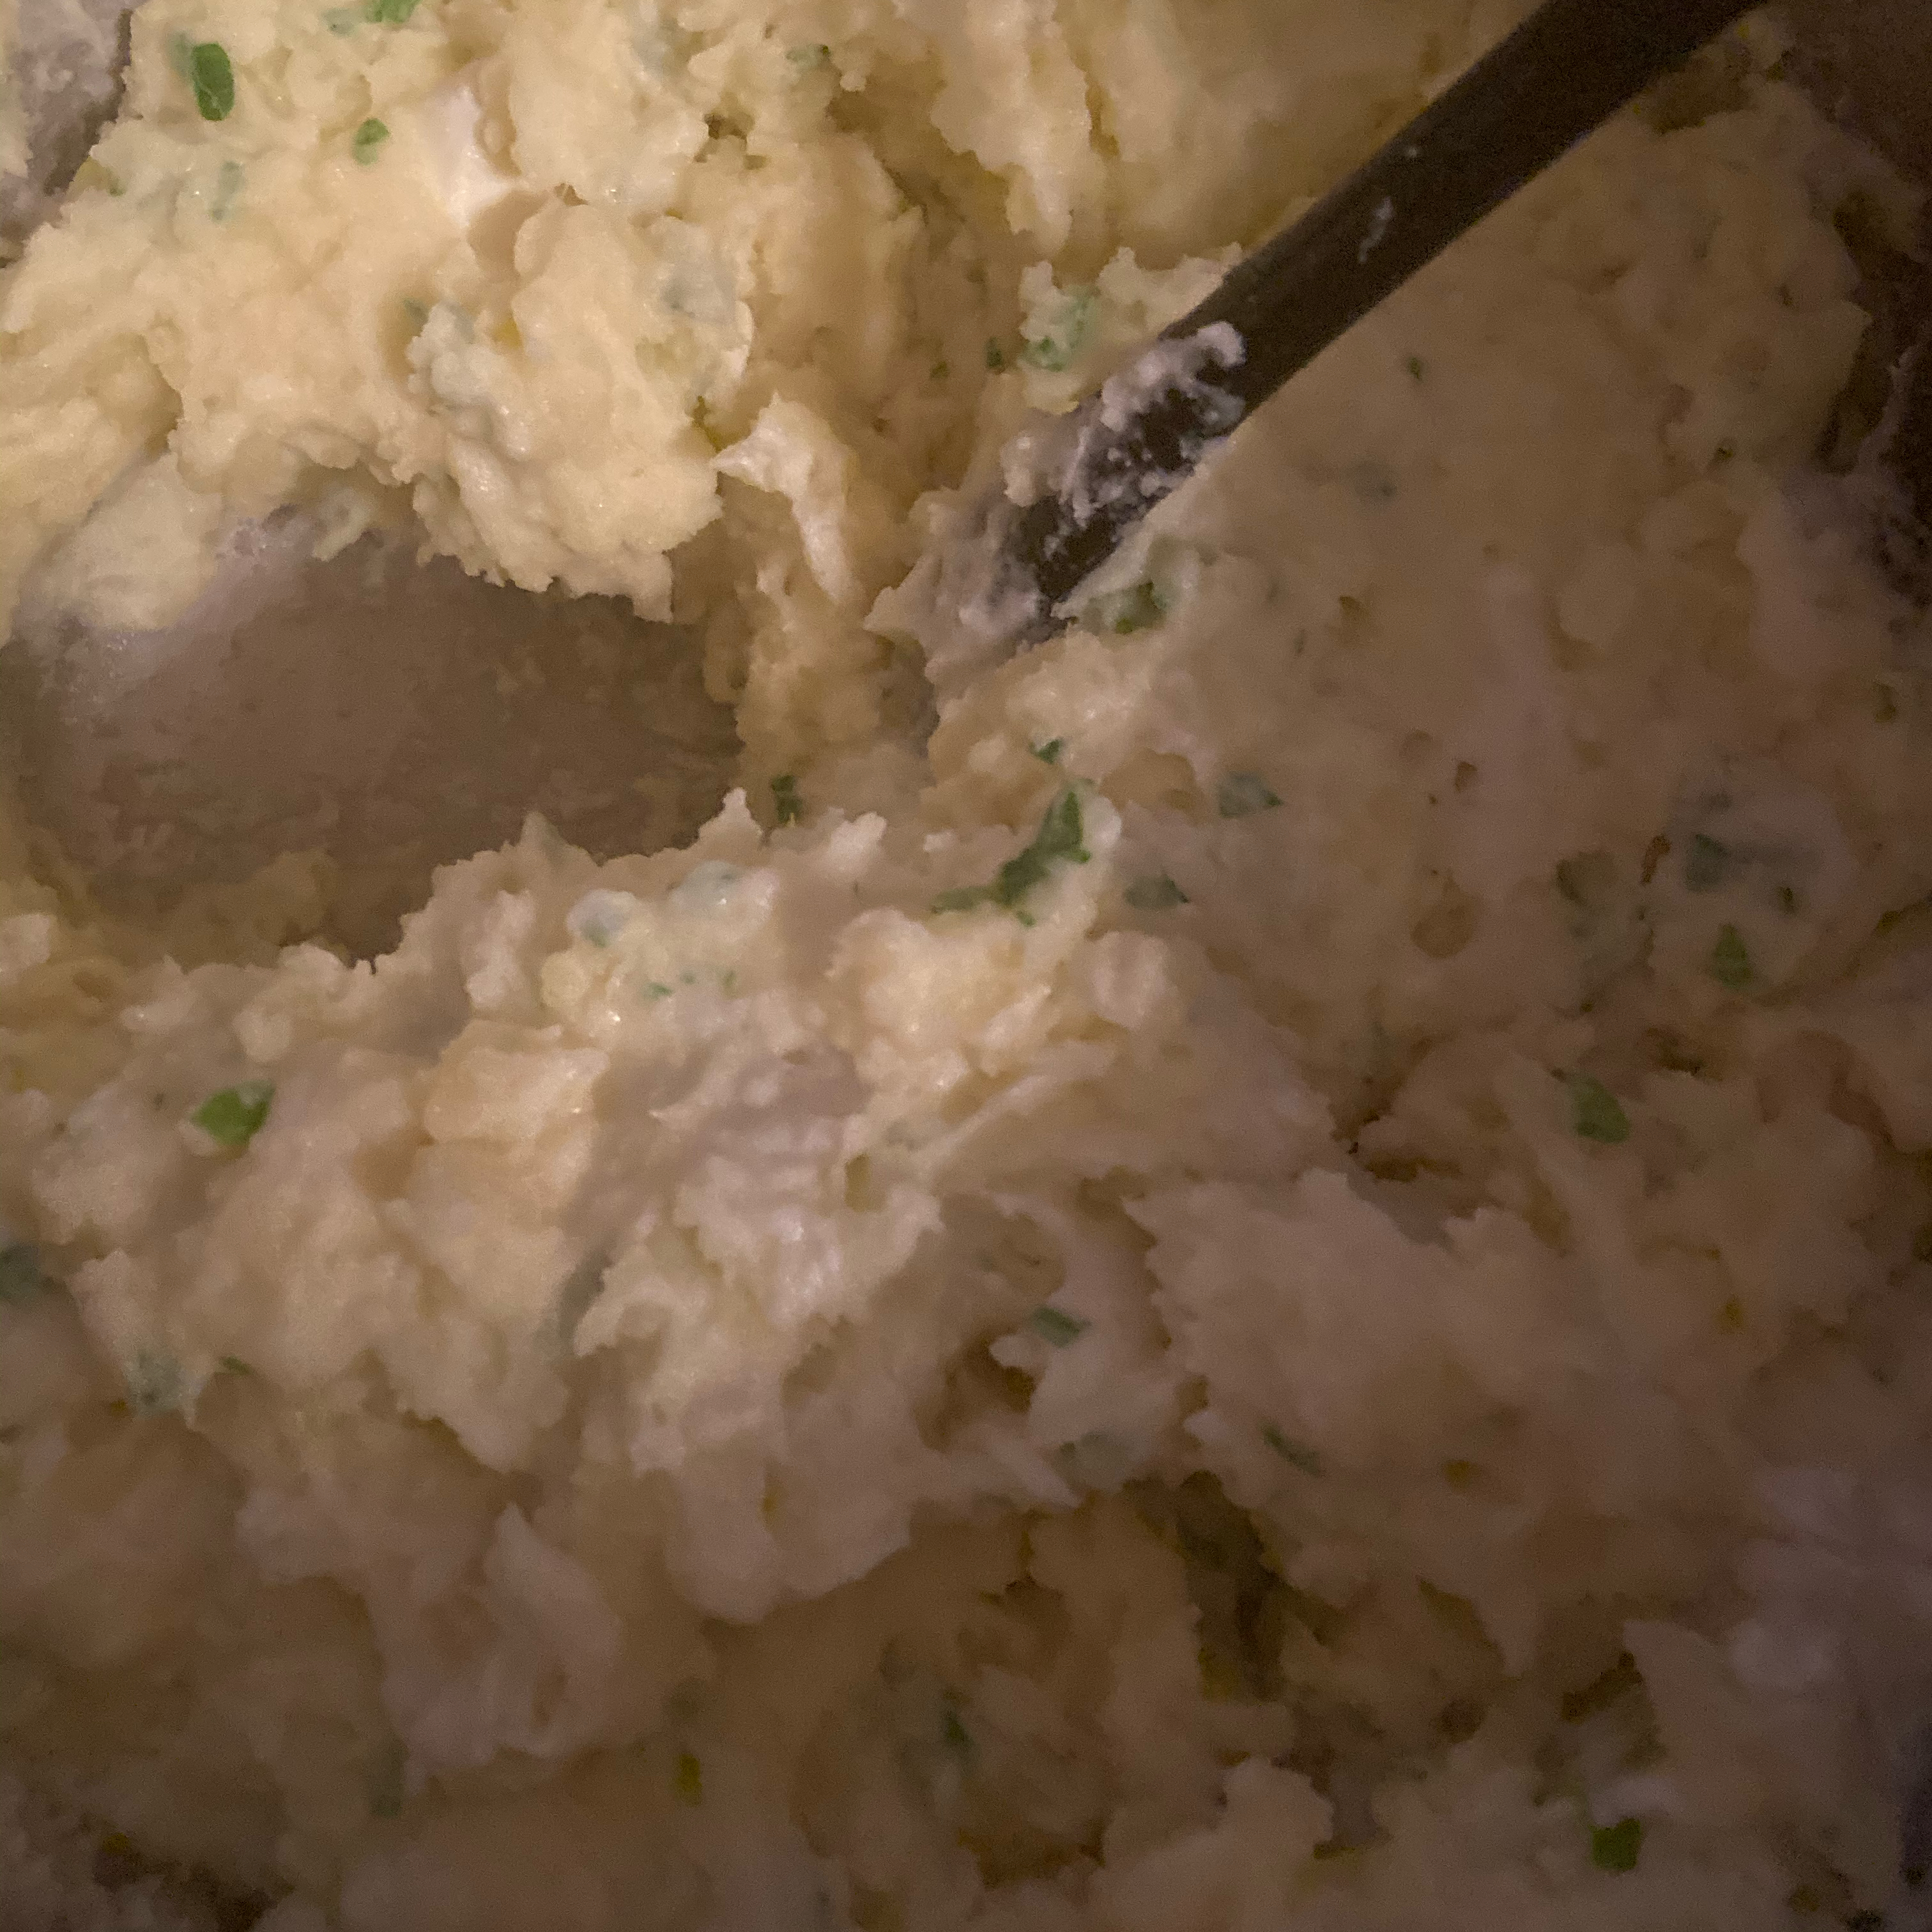 The Best Mashed Potatoes 